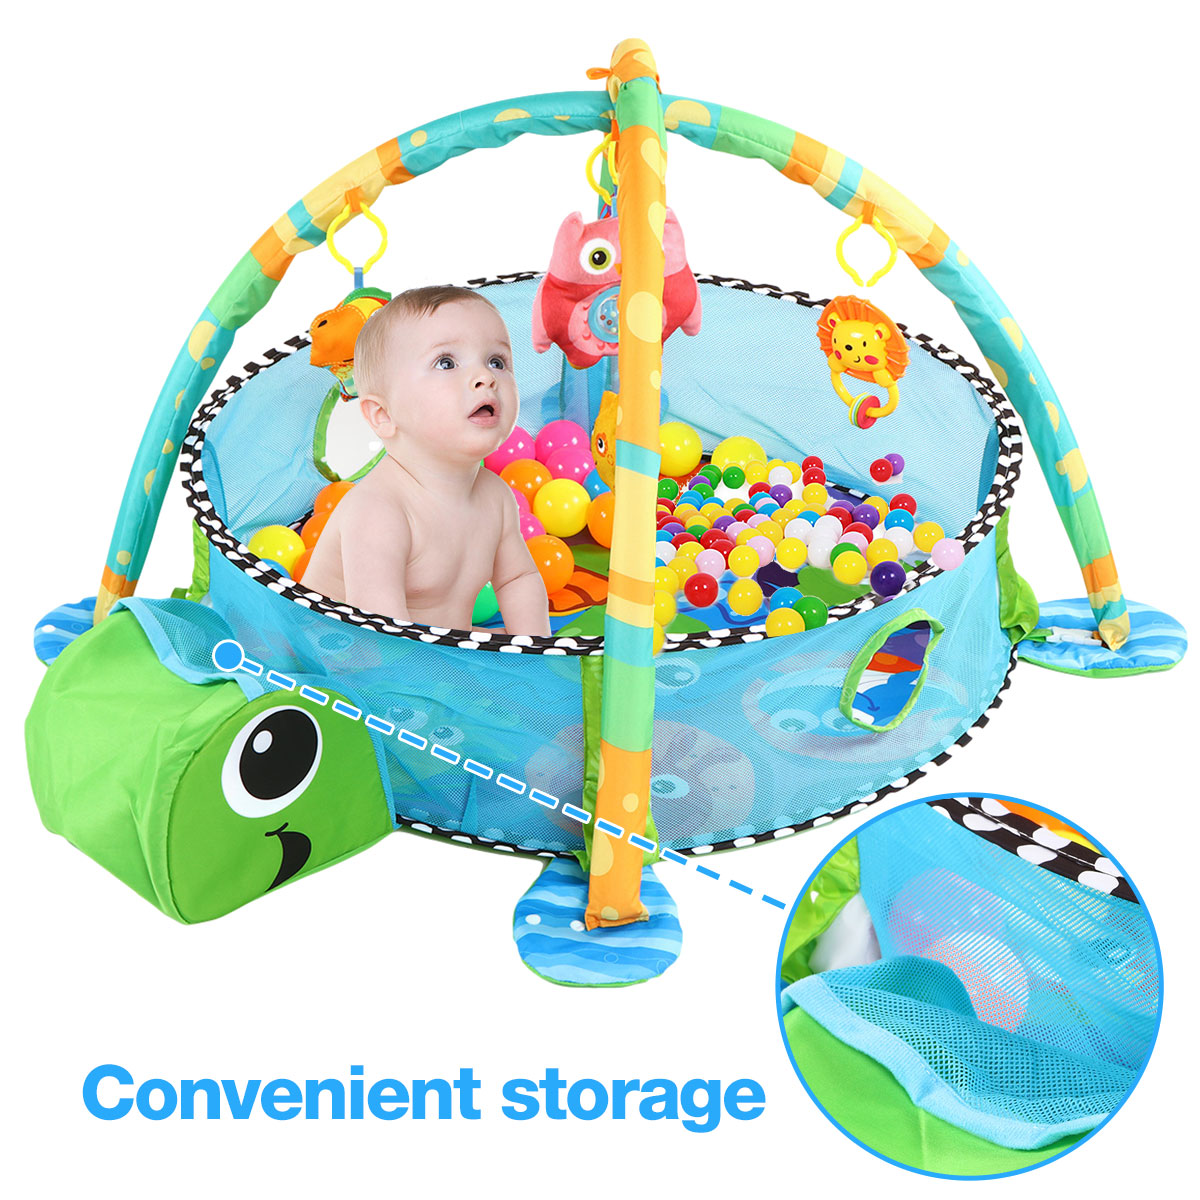 TEAYINGDE 3 in 1 Baby Gym Play Mat Baby Activity with Ocean Ball,Green Turtle - image 5 of 11